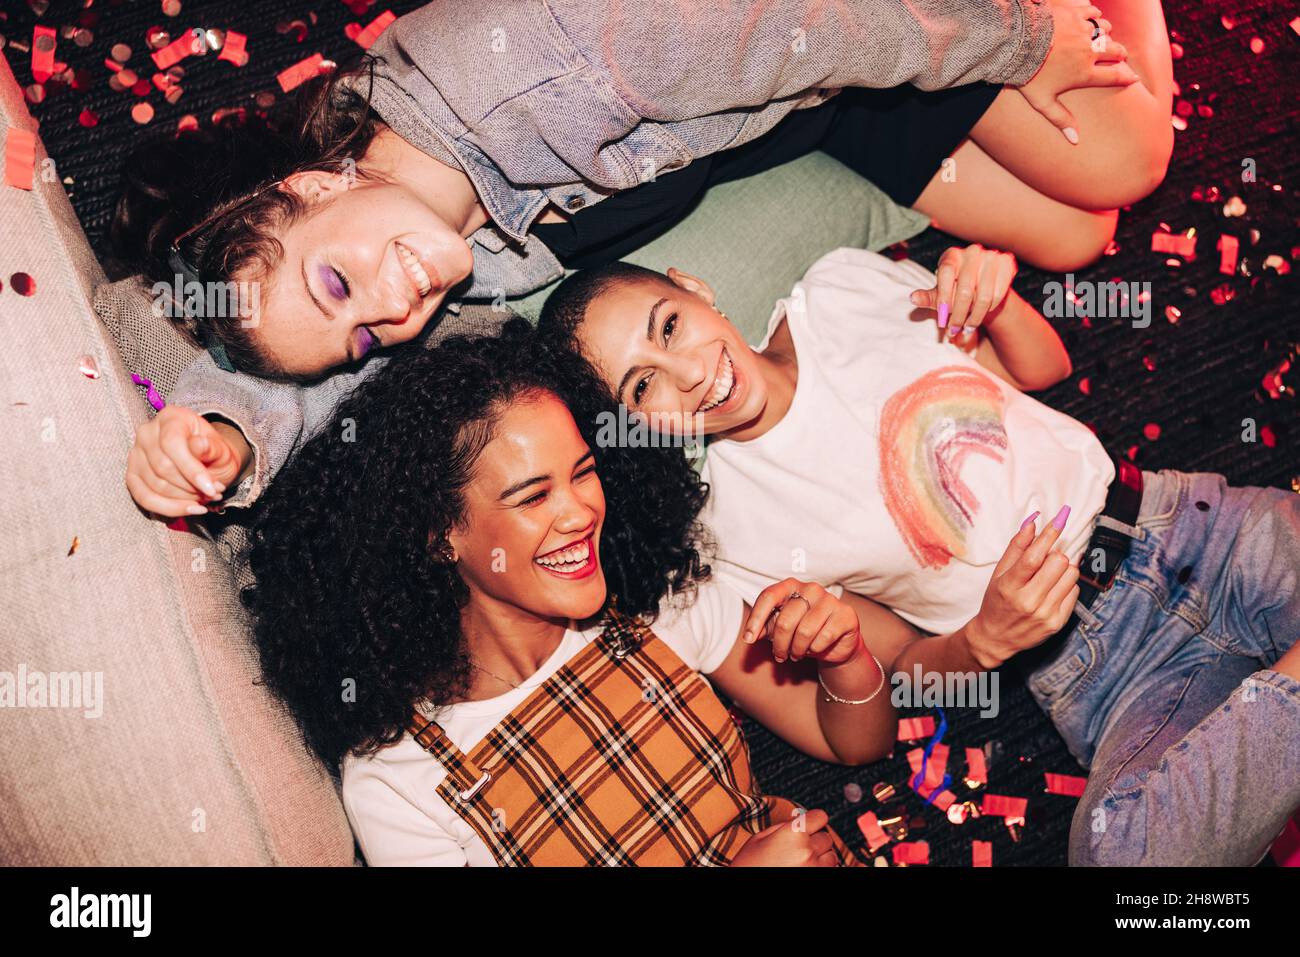 Overhead shot of happy female friends lying on the floor at a house party. Group of three young women laughing and having a good time. Cheerful young Stock Photo